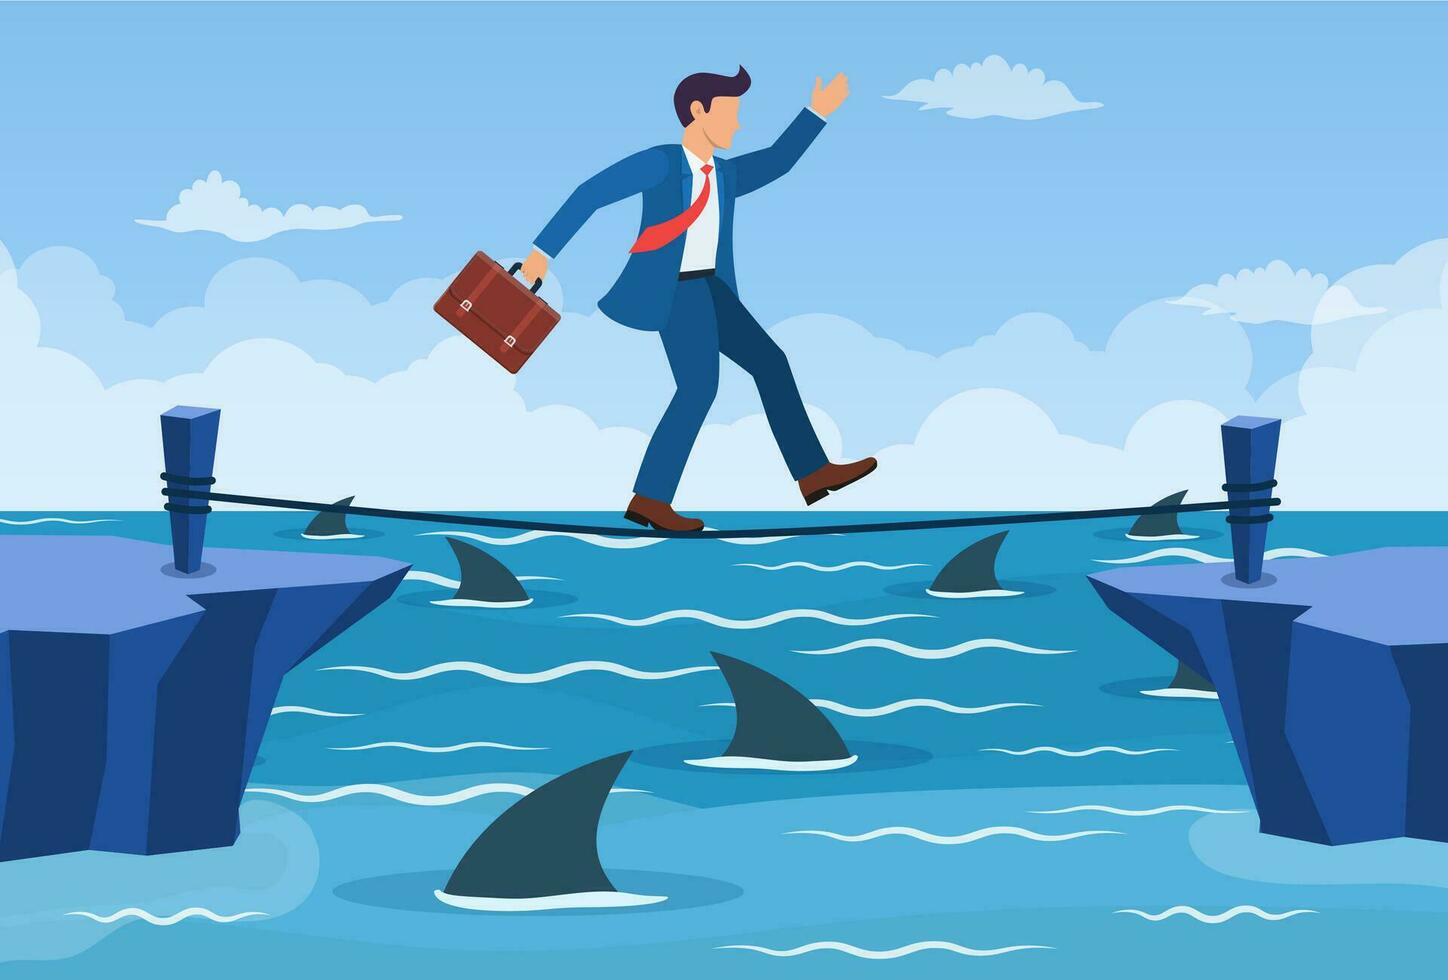 Businessman walking a tightrope over shark in water. Businessman walking on rope with briefcase. Obstacle on road, financial crisis. Risk management challenge. Vector illustration in flat style.